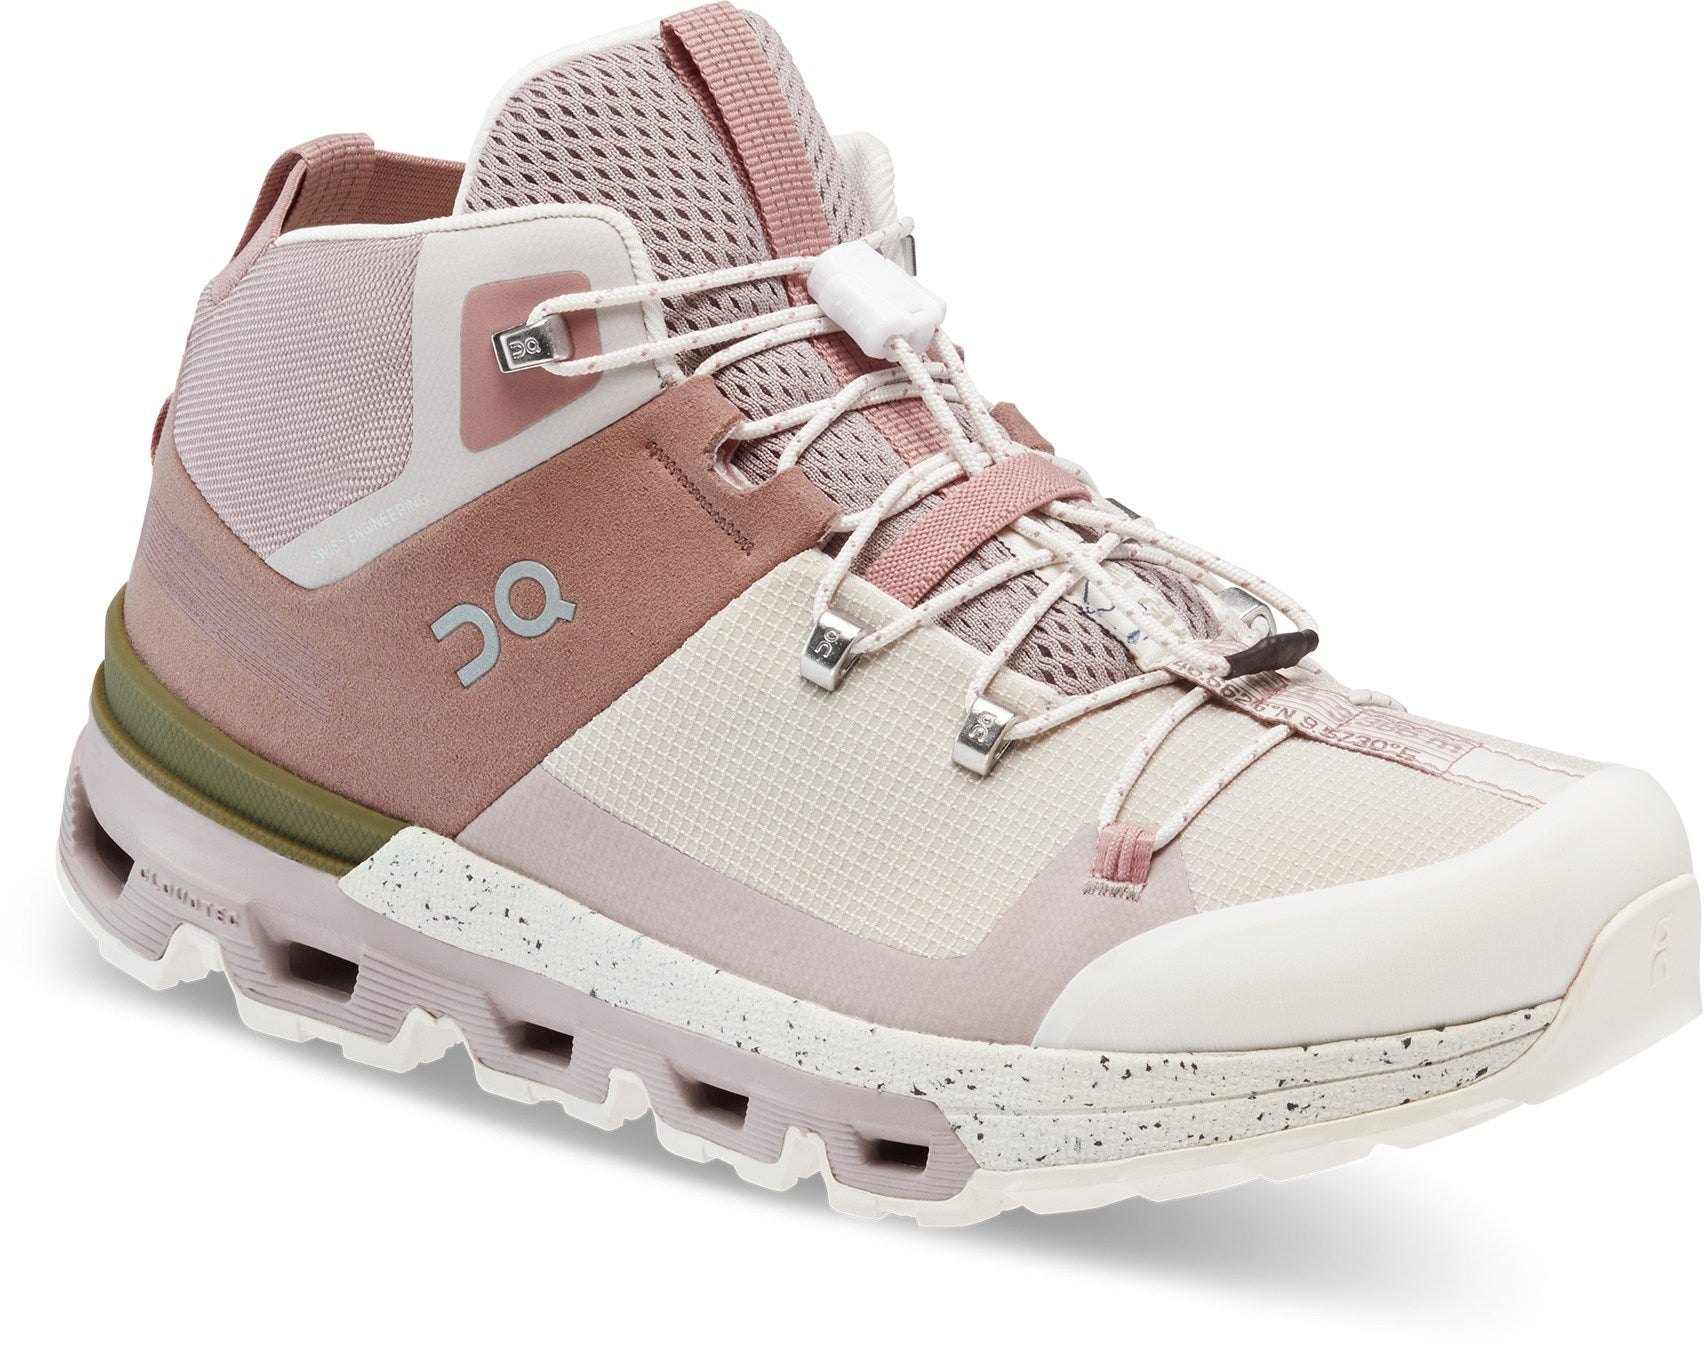 Front angled view of the Women's Cloudtrax hiking boot by ON in the color Rose/Ivory